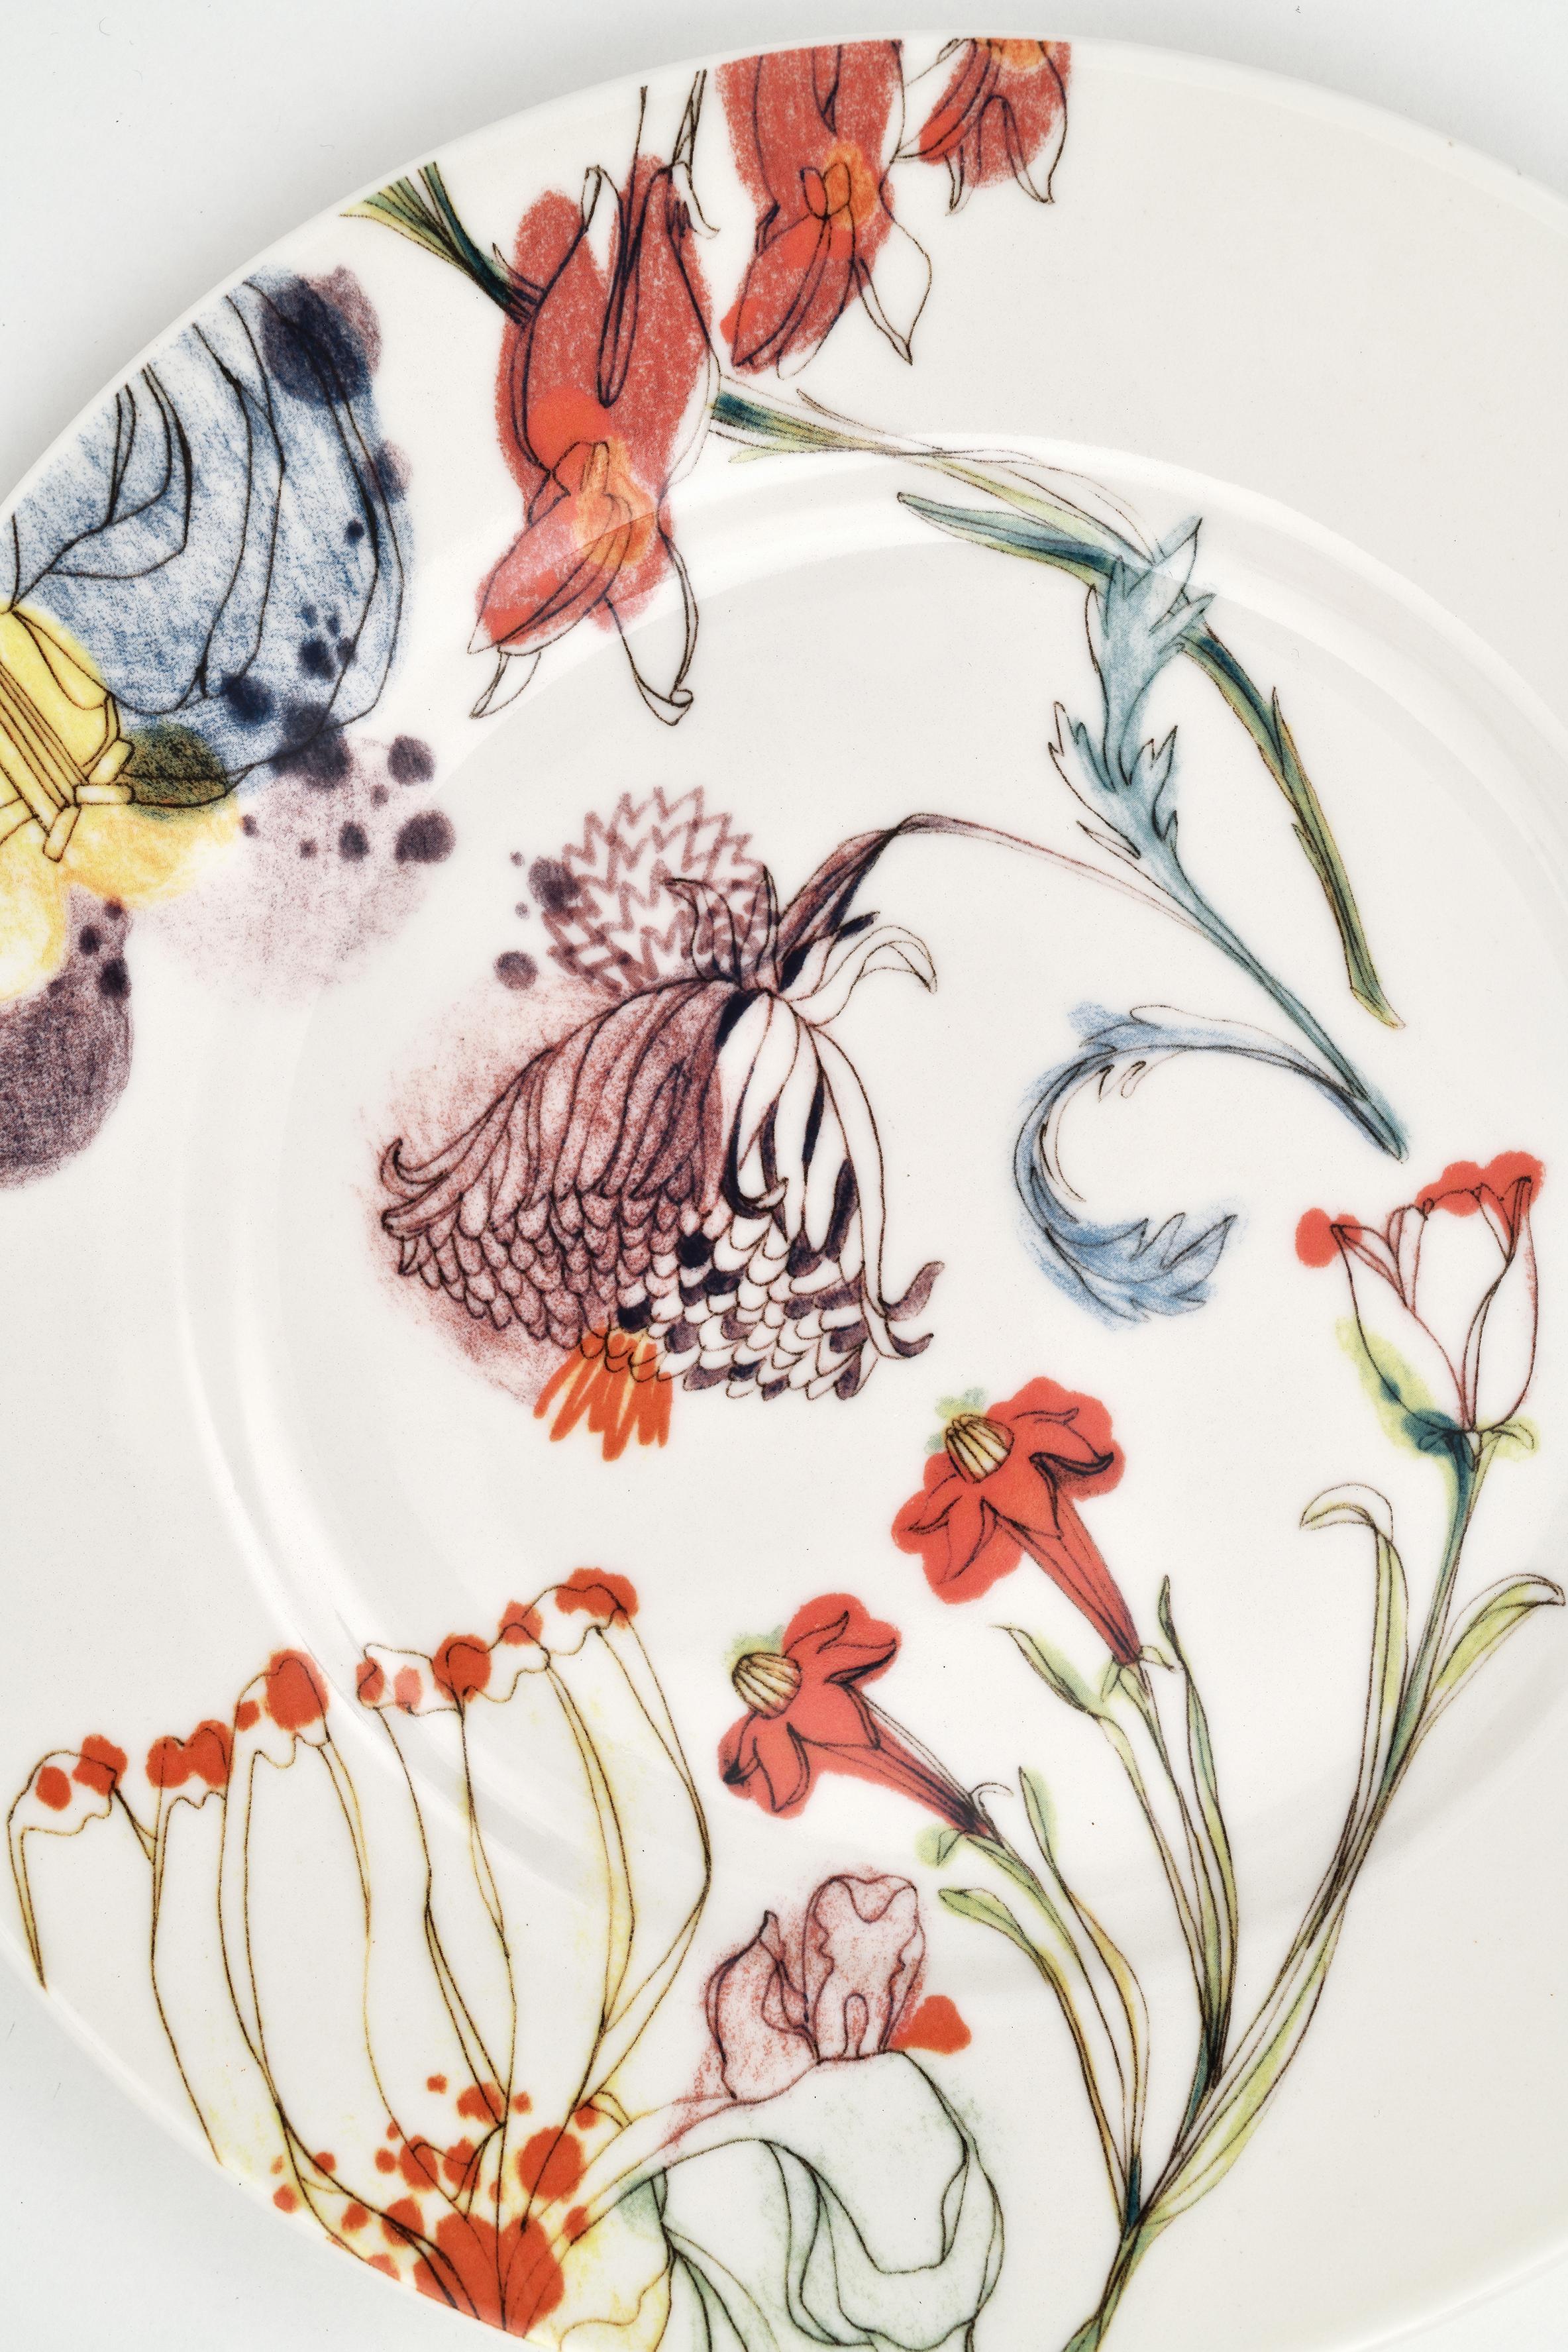 Belonging to the Grandma's garden porcelain series, the design of this dessert plate represents a sophisticated and elegant floral designs full of blossoms and buds with delicate colors blending together for a fresh and contemporary look, typical of